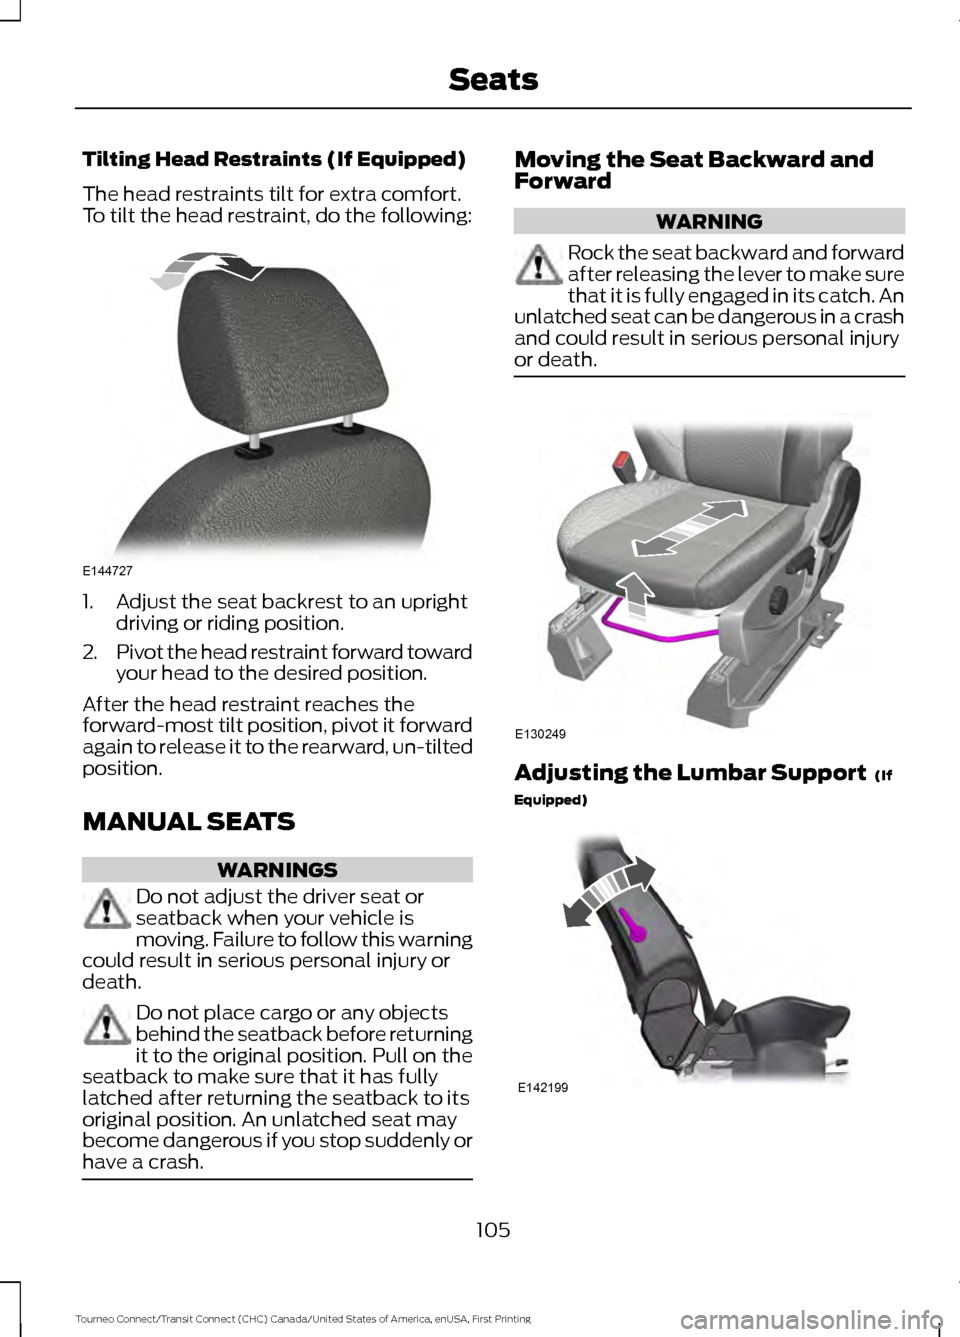 FORD TRANSIT CONNECT 2016 2.G Owners Manual Tilting Head Restraints (If Equipped)
The head restraints tilt for extra comfort.
To tilt the head restraint, do the following:
1. Adjust the seat backrest to an upright
driving or riding position.
2.